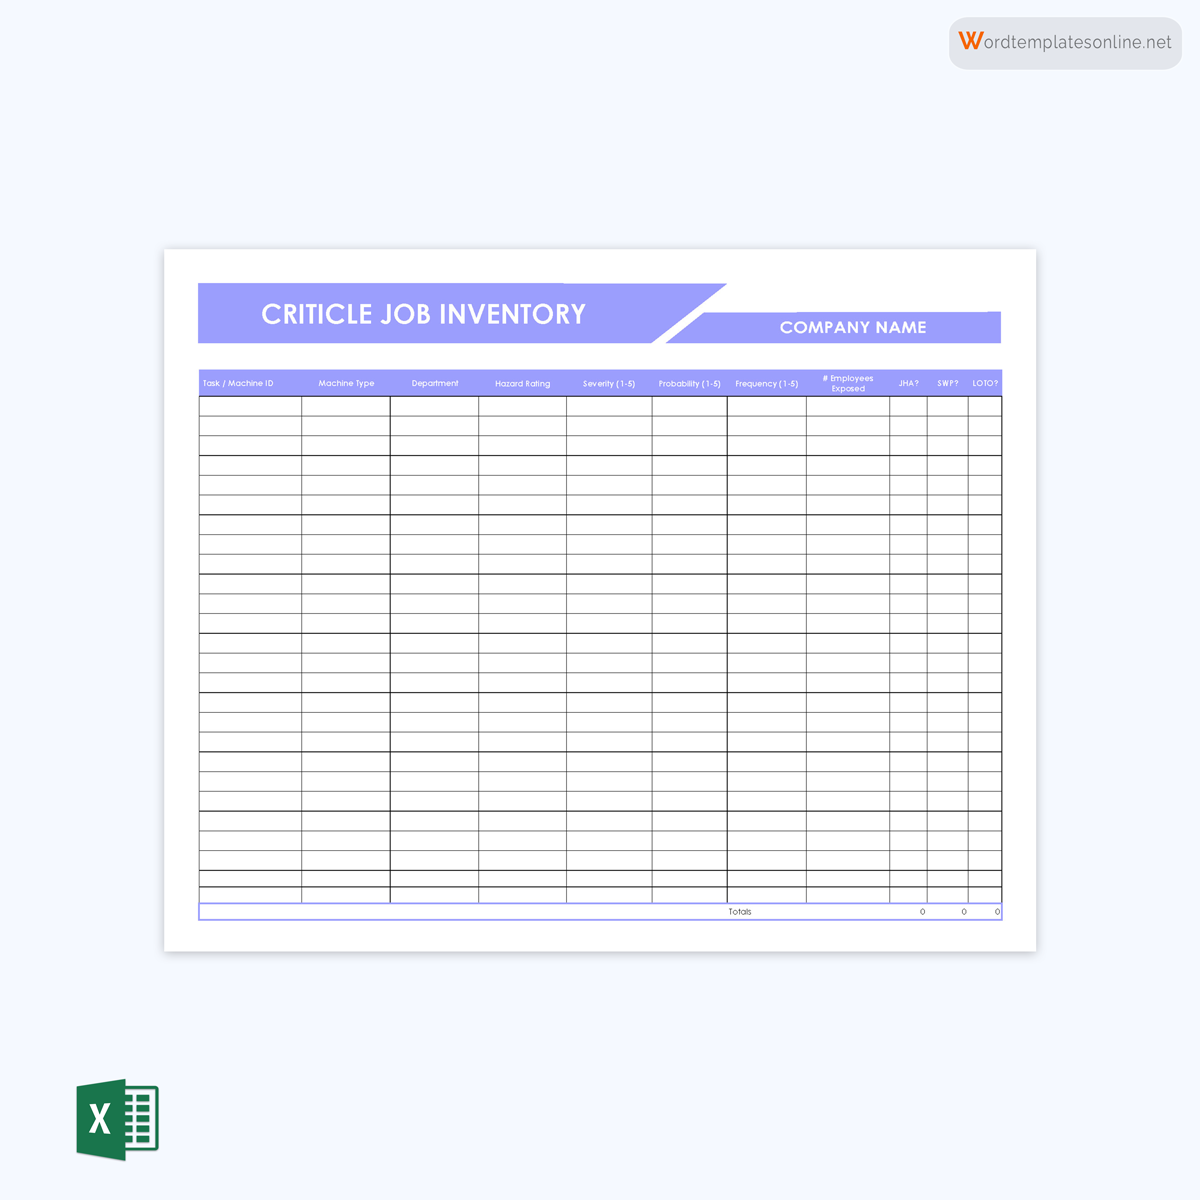 Inventory form example - Free Excel Template